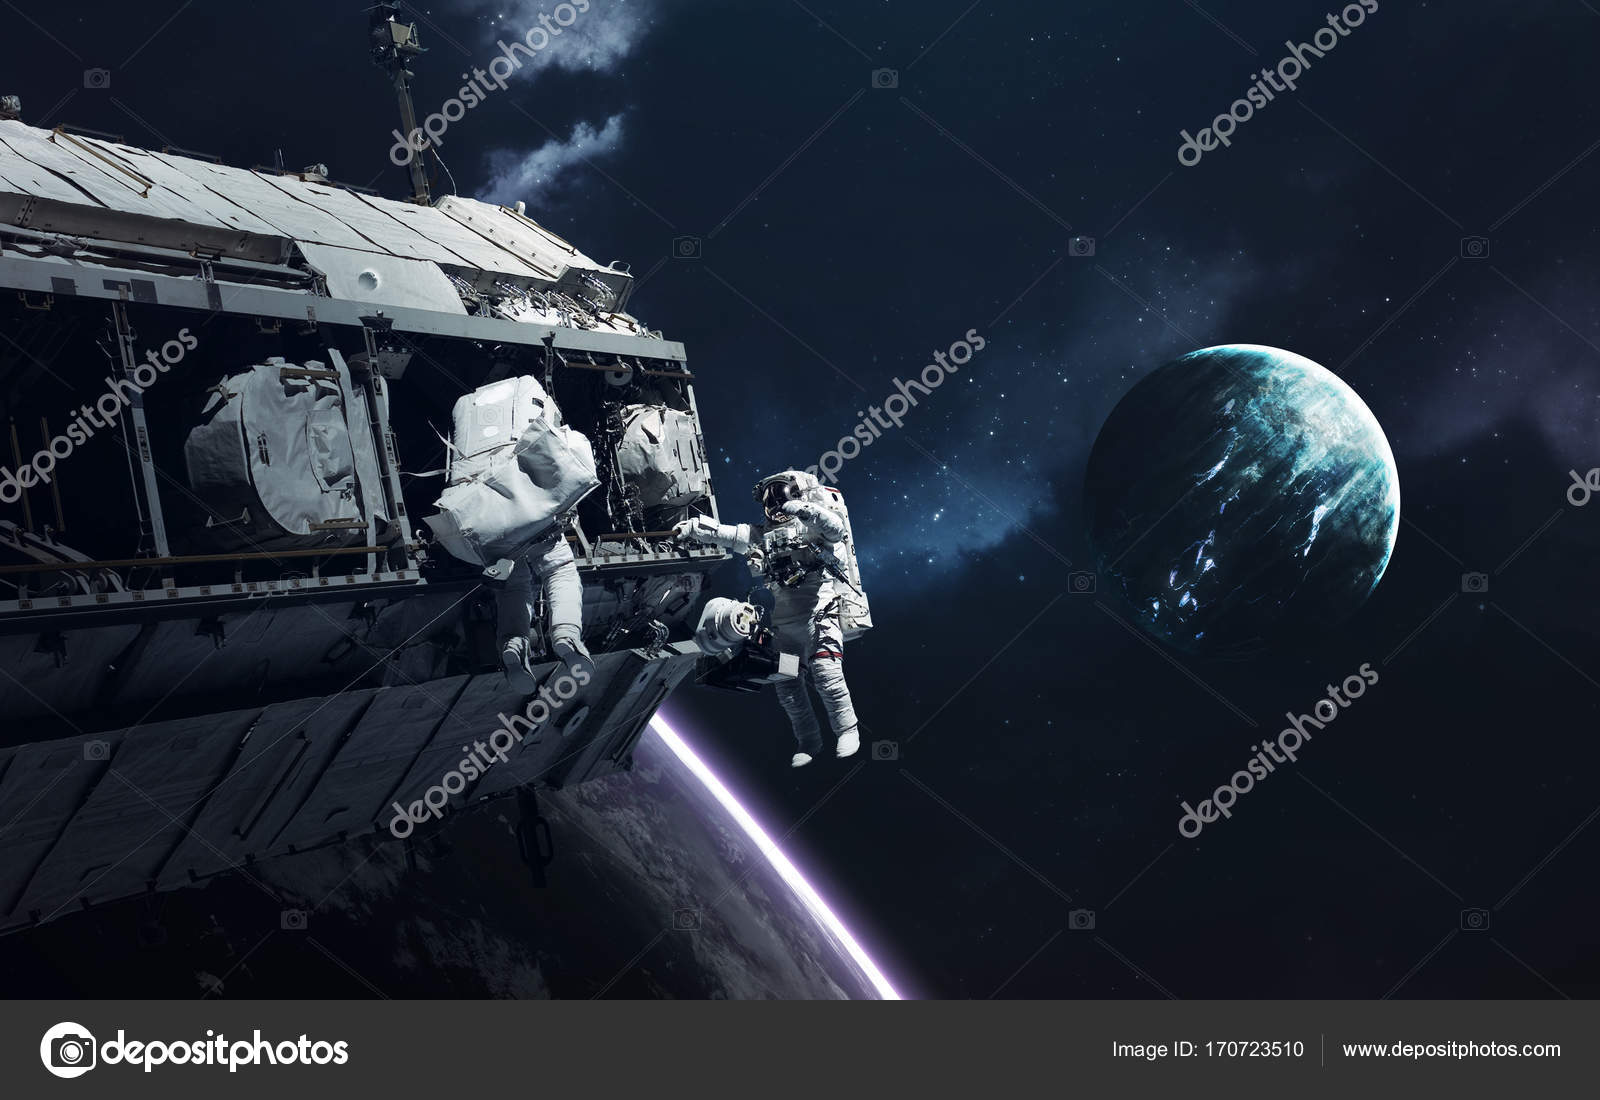 güzel wallpaper,outer space,space station,spacecraft,astronomical object,space